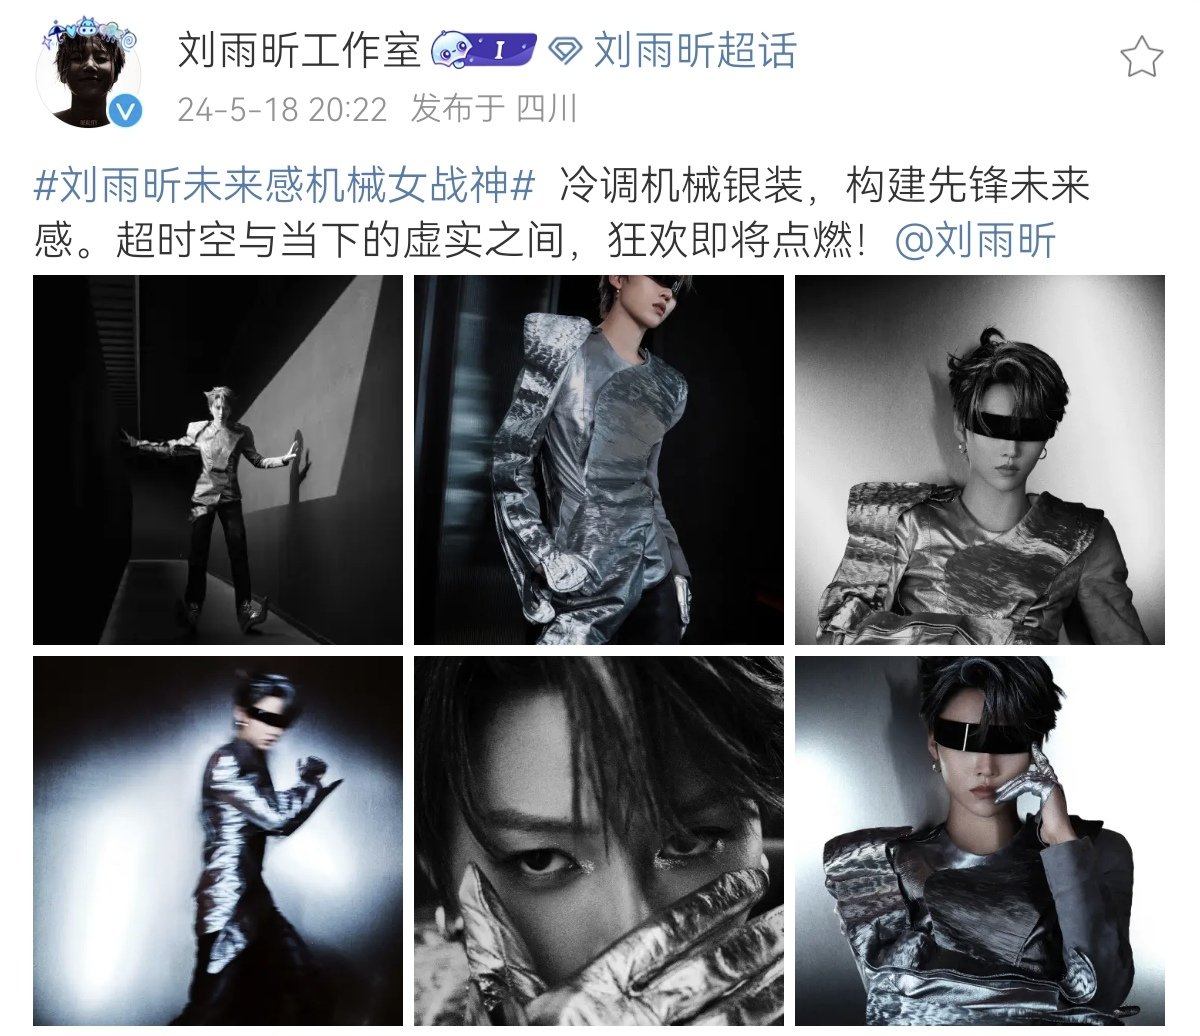 XIN Studio Weibo Update

Cold-toned mechanical silver decoration creates a pioneering futuristic feel. Between time and space and the reality of the present, the carnival is about to ignite! @XinLiulyx0420 
🔗：weibo.com/6303297939/503…

#XINLiu #LiuYuxin #刘雨昕 #หลิวอวี่ซิน